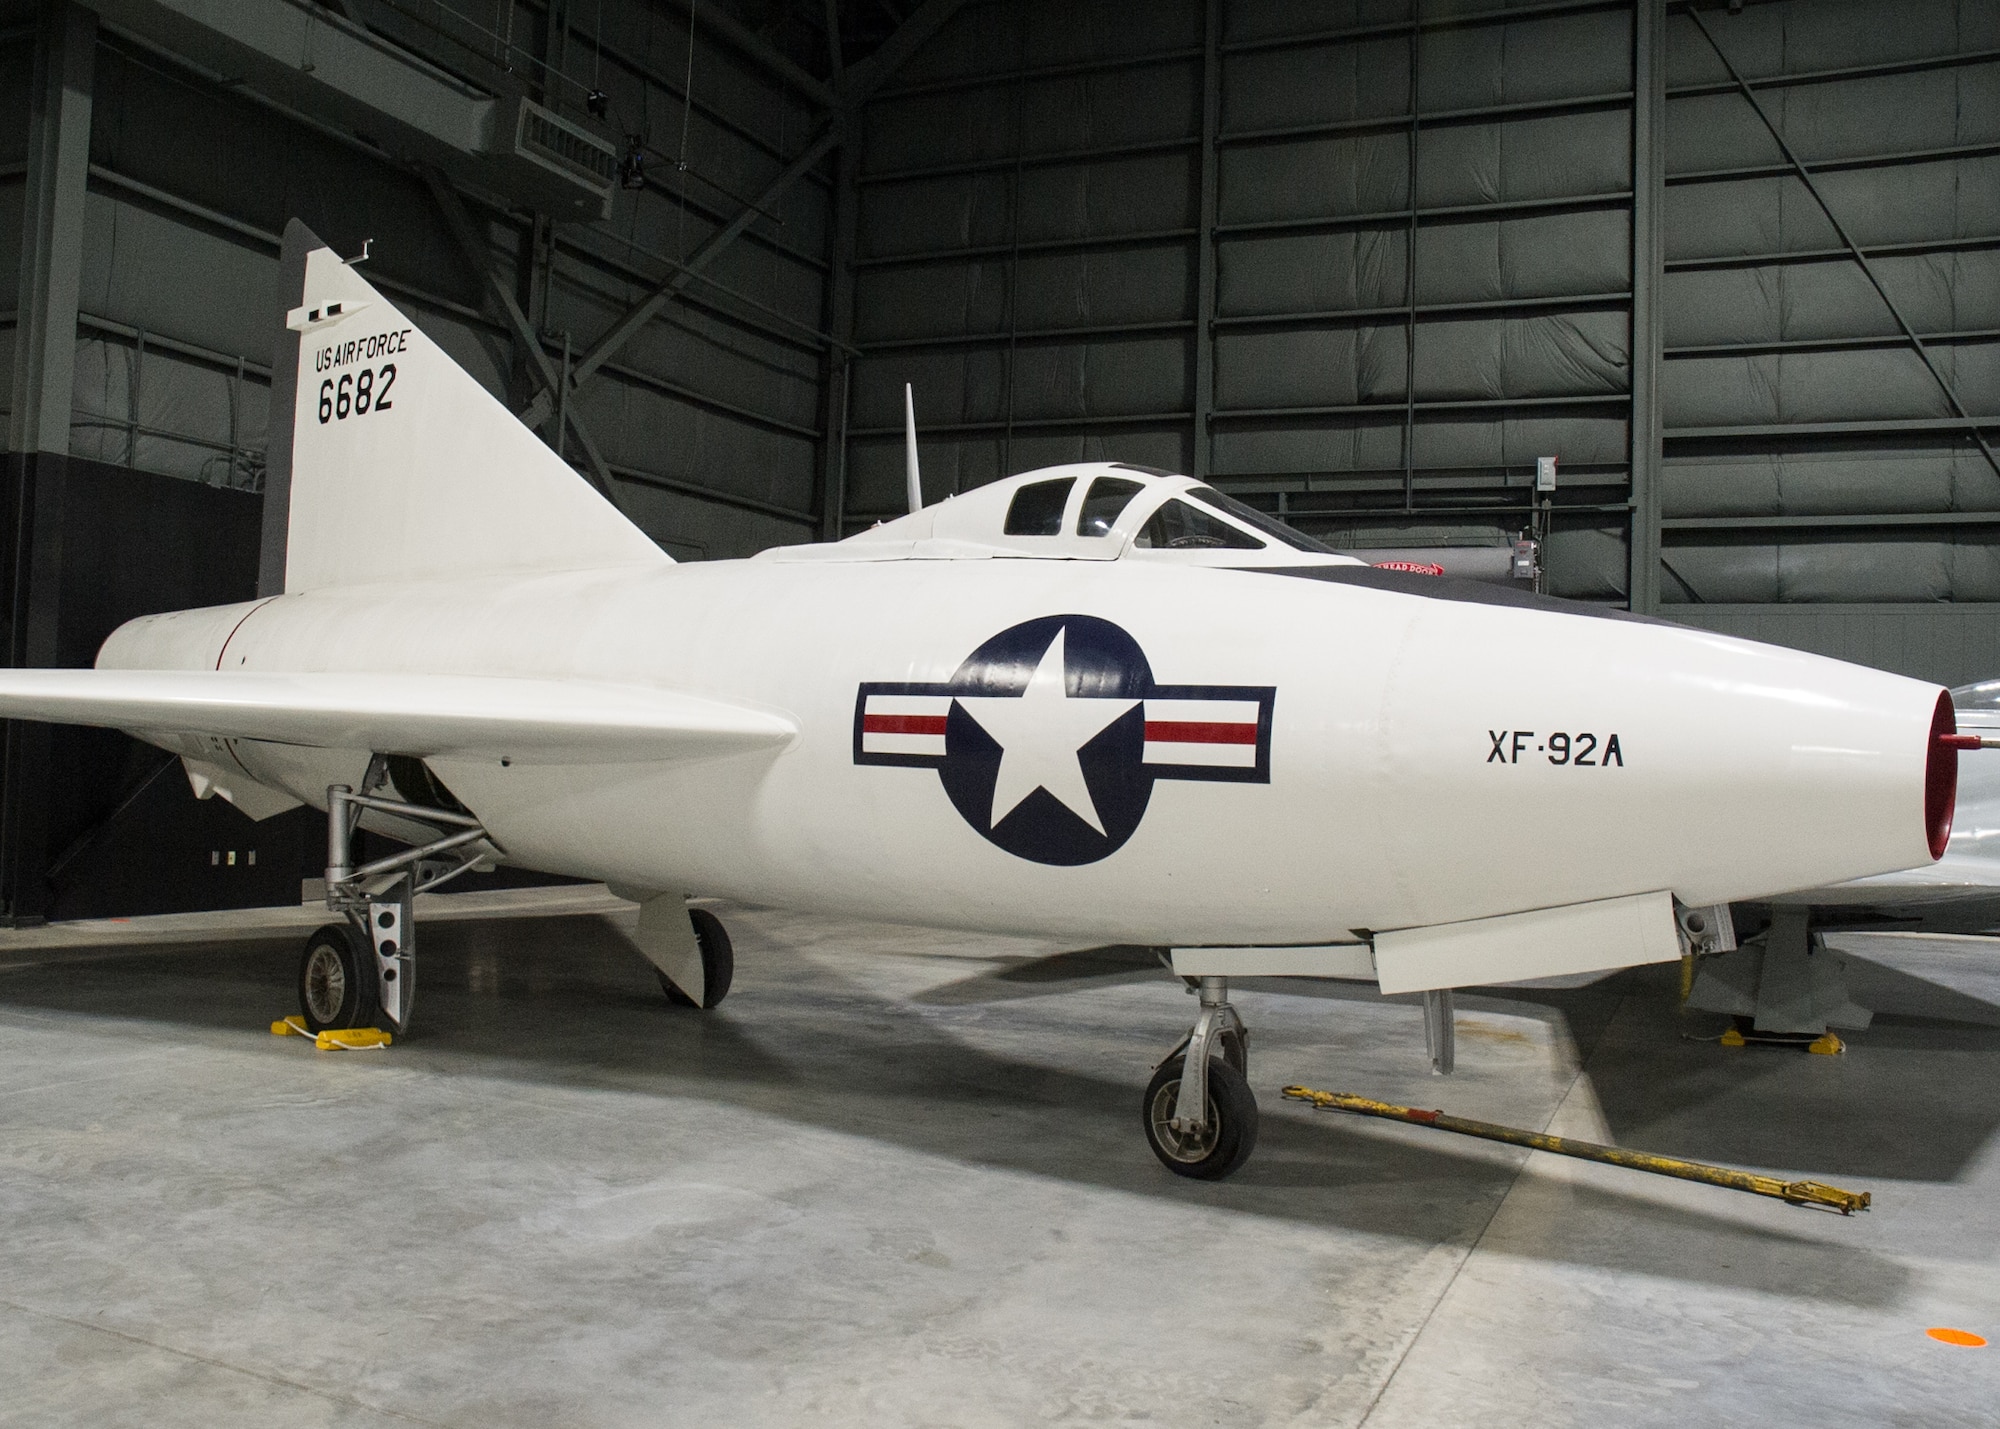 Convair XF-92A in the Research & Development Gallery at the National Museum of the U.S. Air Force on December 28, 2015. (U.S. Air Force photo)